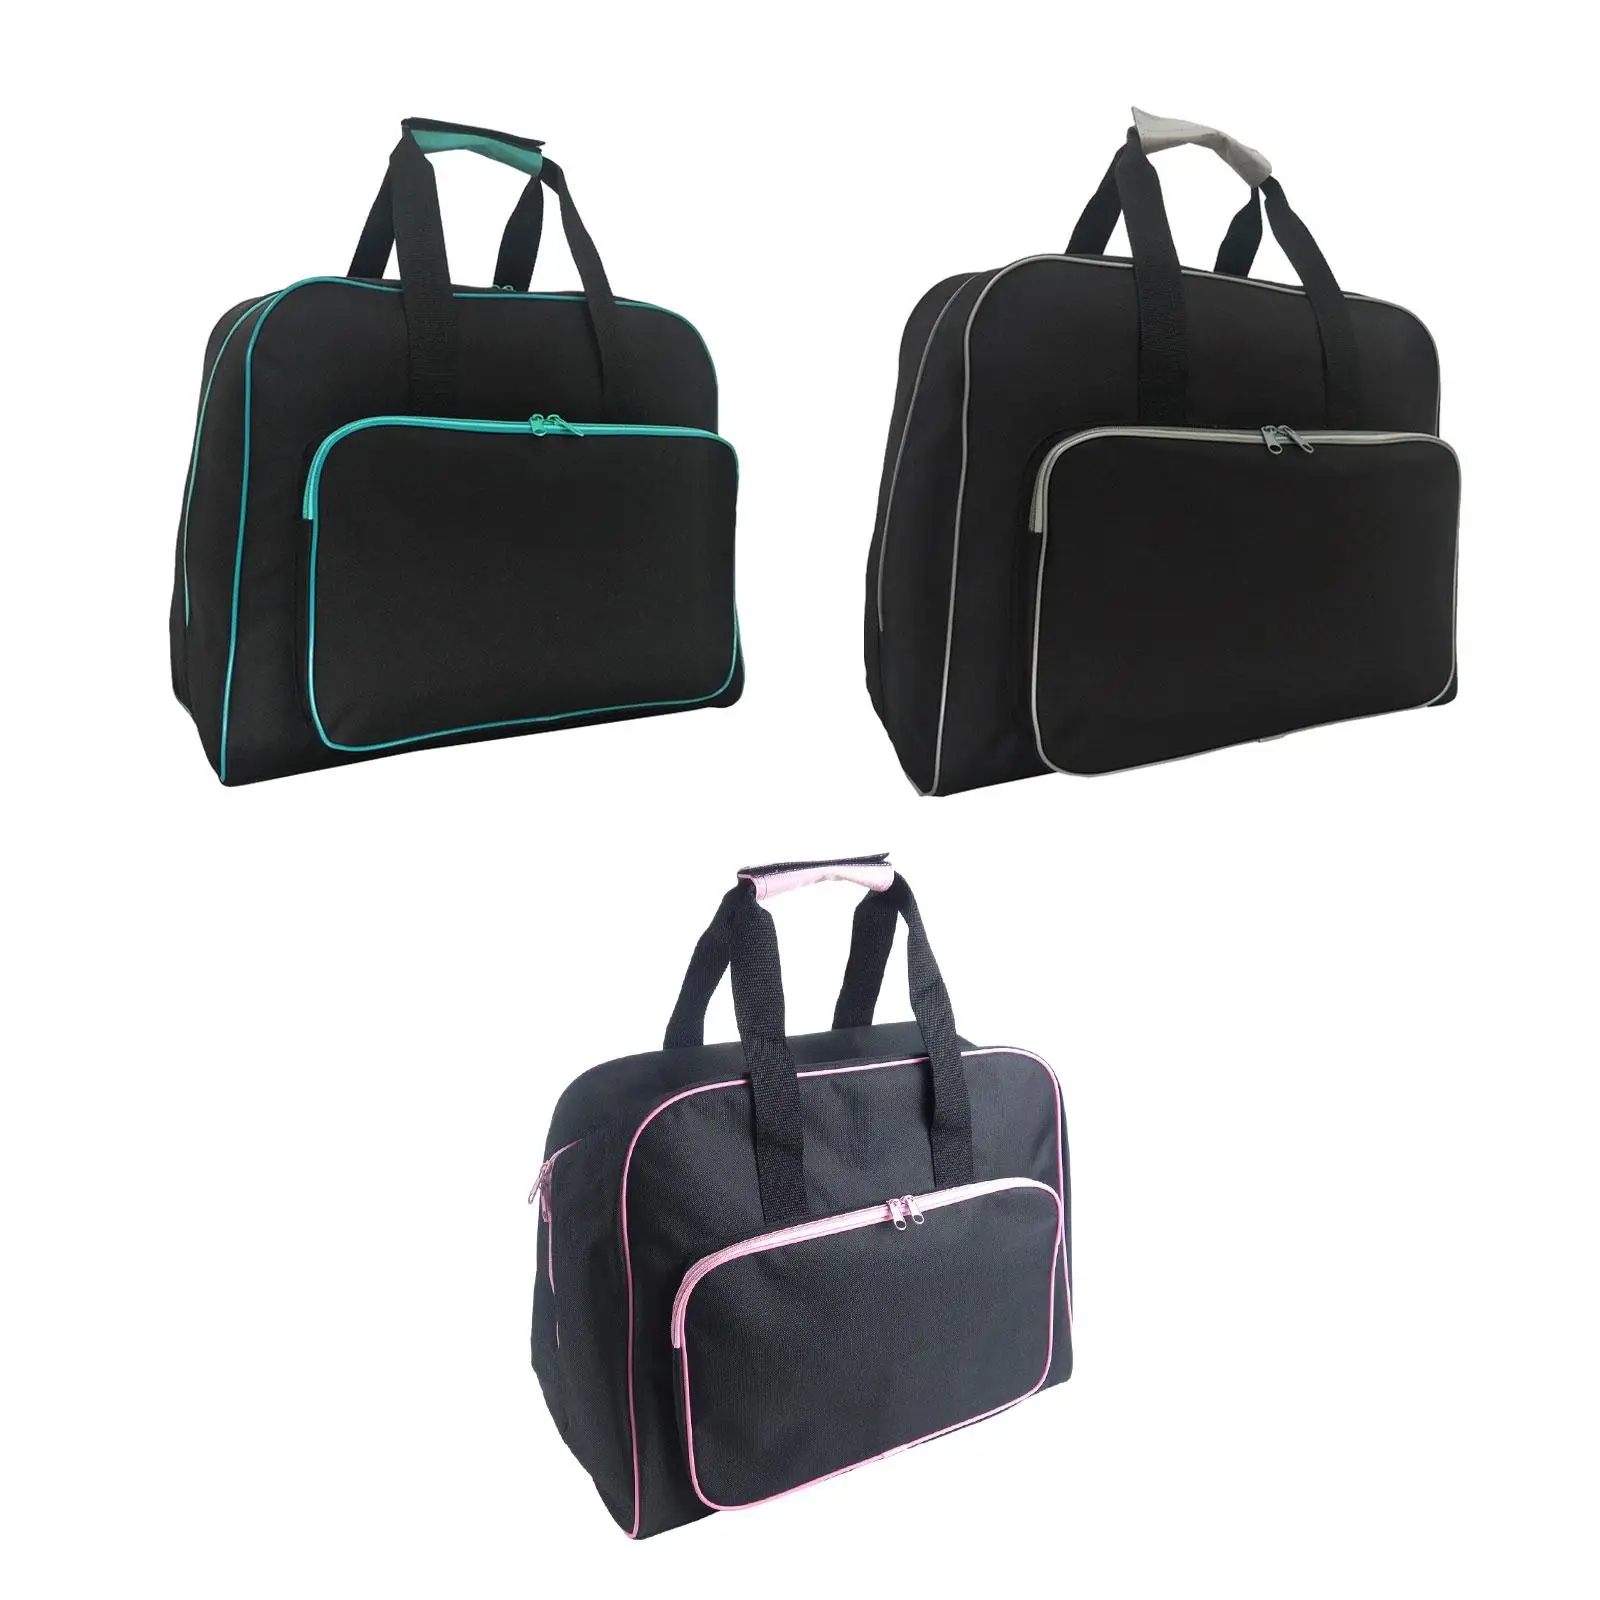 Travel Duffle Bag Adults Pouch Toiletry Multifunction Thick Weekender Bag Sports Gym Bag for Exercise Office Yoga Sports Camping